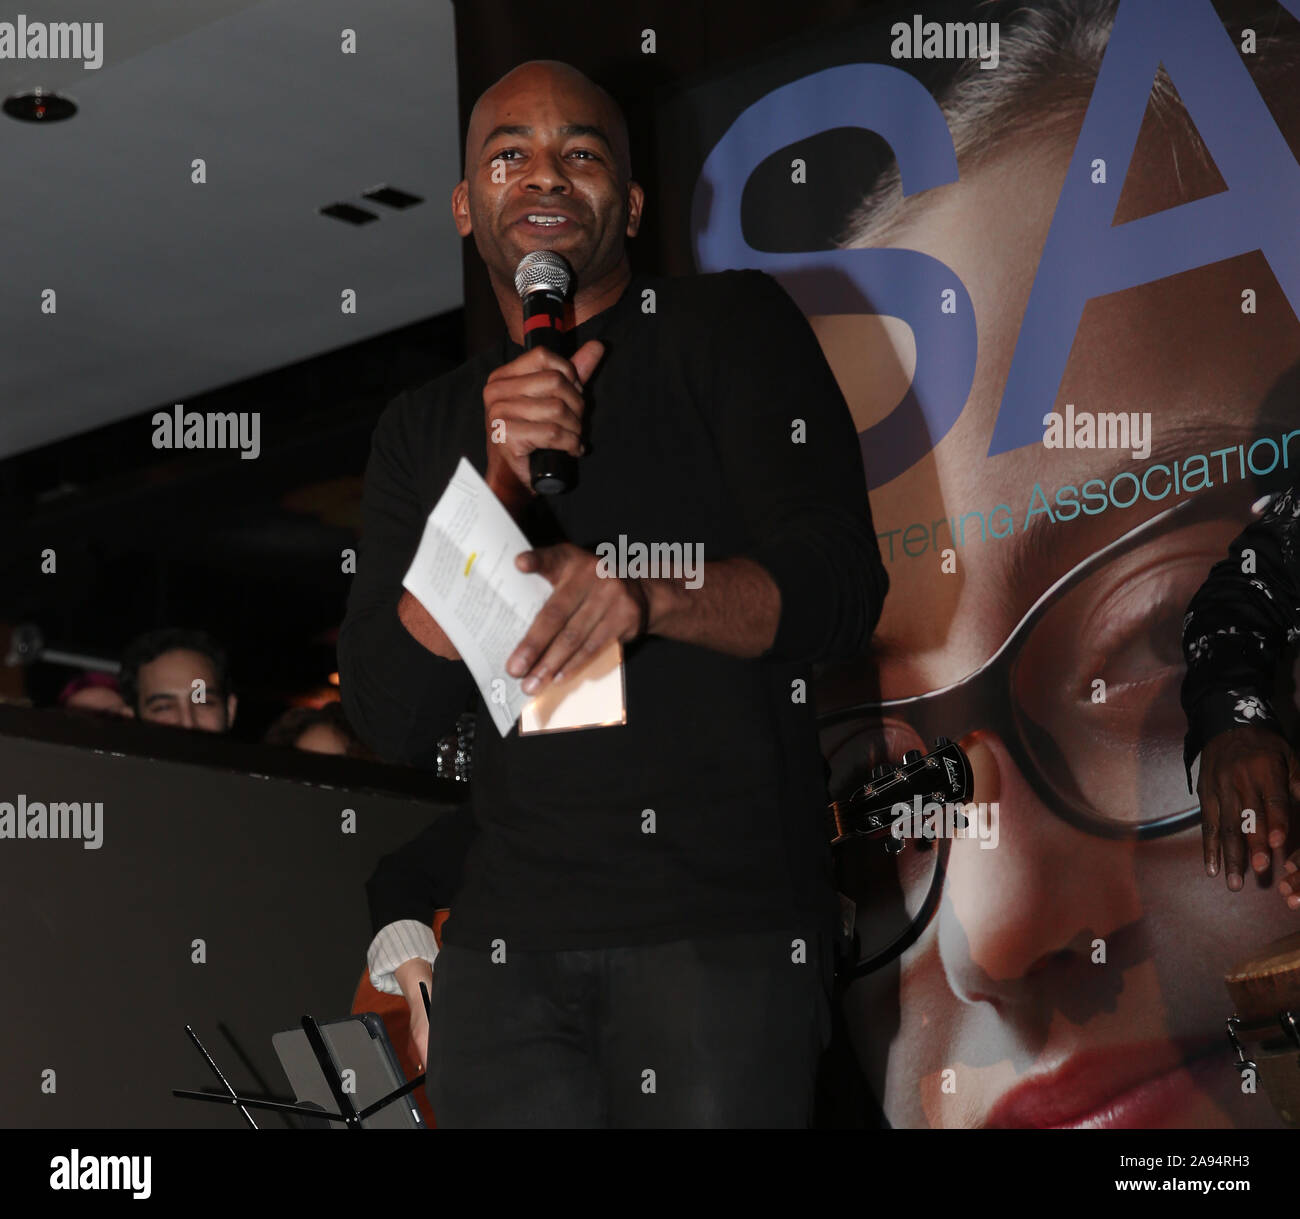 NEW YORK - NOV 11: Brandon Victor Dixon attends the 8th Annual Paul Rudd All-Star Benefit for SAY at Lucky Strike Lanes on November 11, 2019 in New Yo Stock Photo